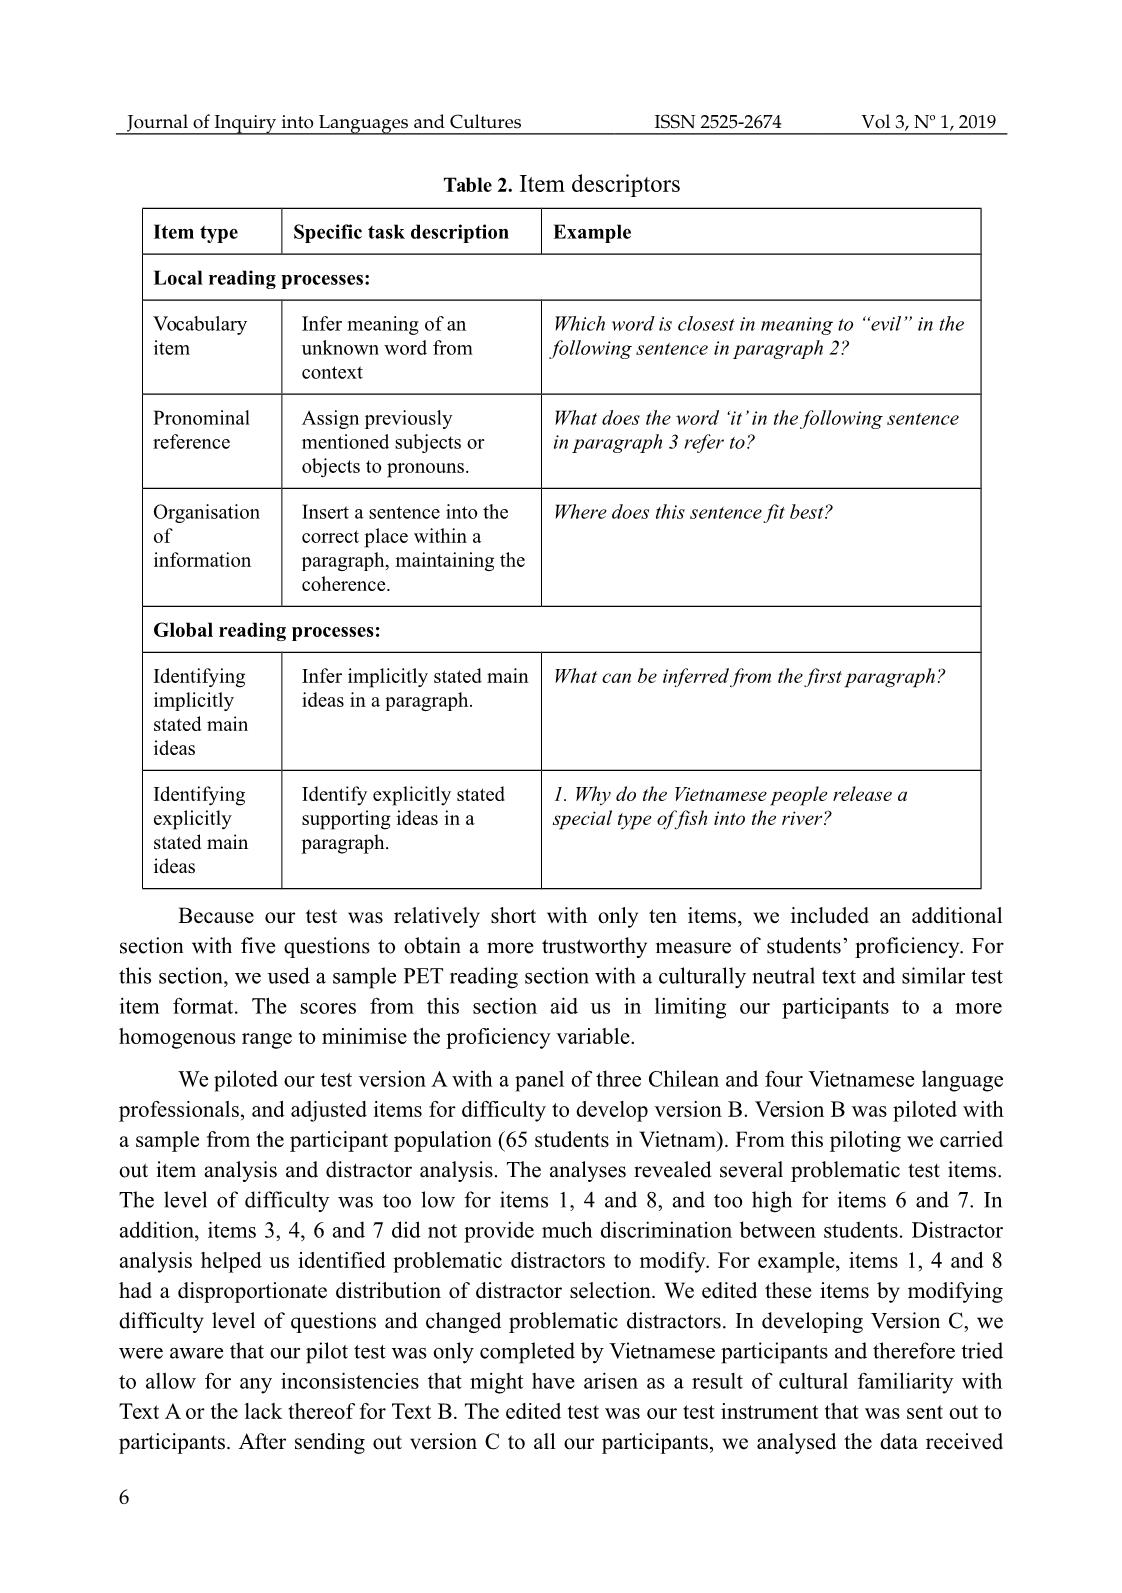 Effect of cultural familiarity on reading comprehension performance: a case­study of vietnamese and chilean efl learners trang 6